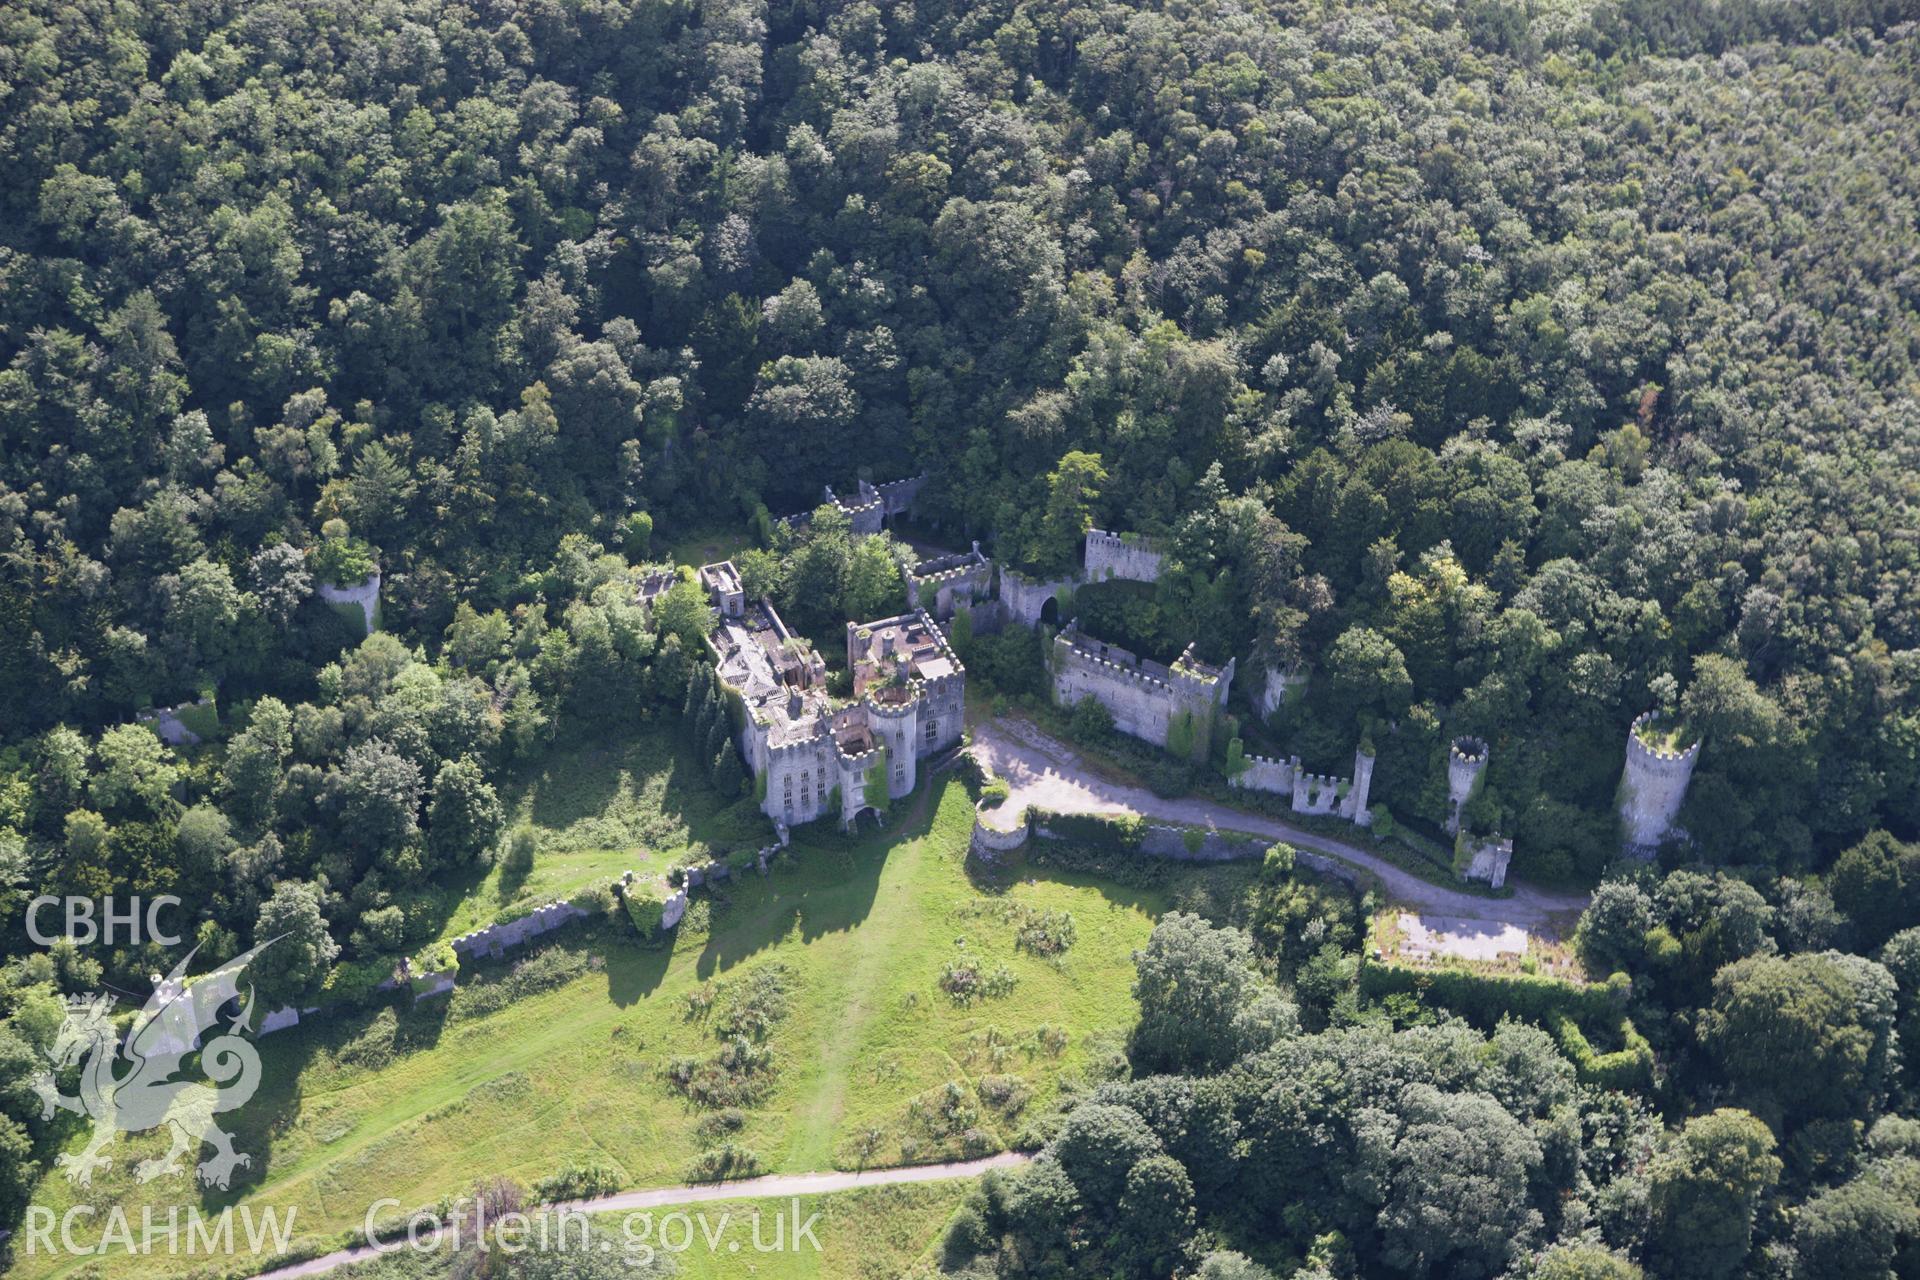 RCAHMW colour oblique aerial photograph of Gwrych Castle. Taken on 31 July 2007 by Toby Driver